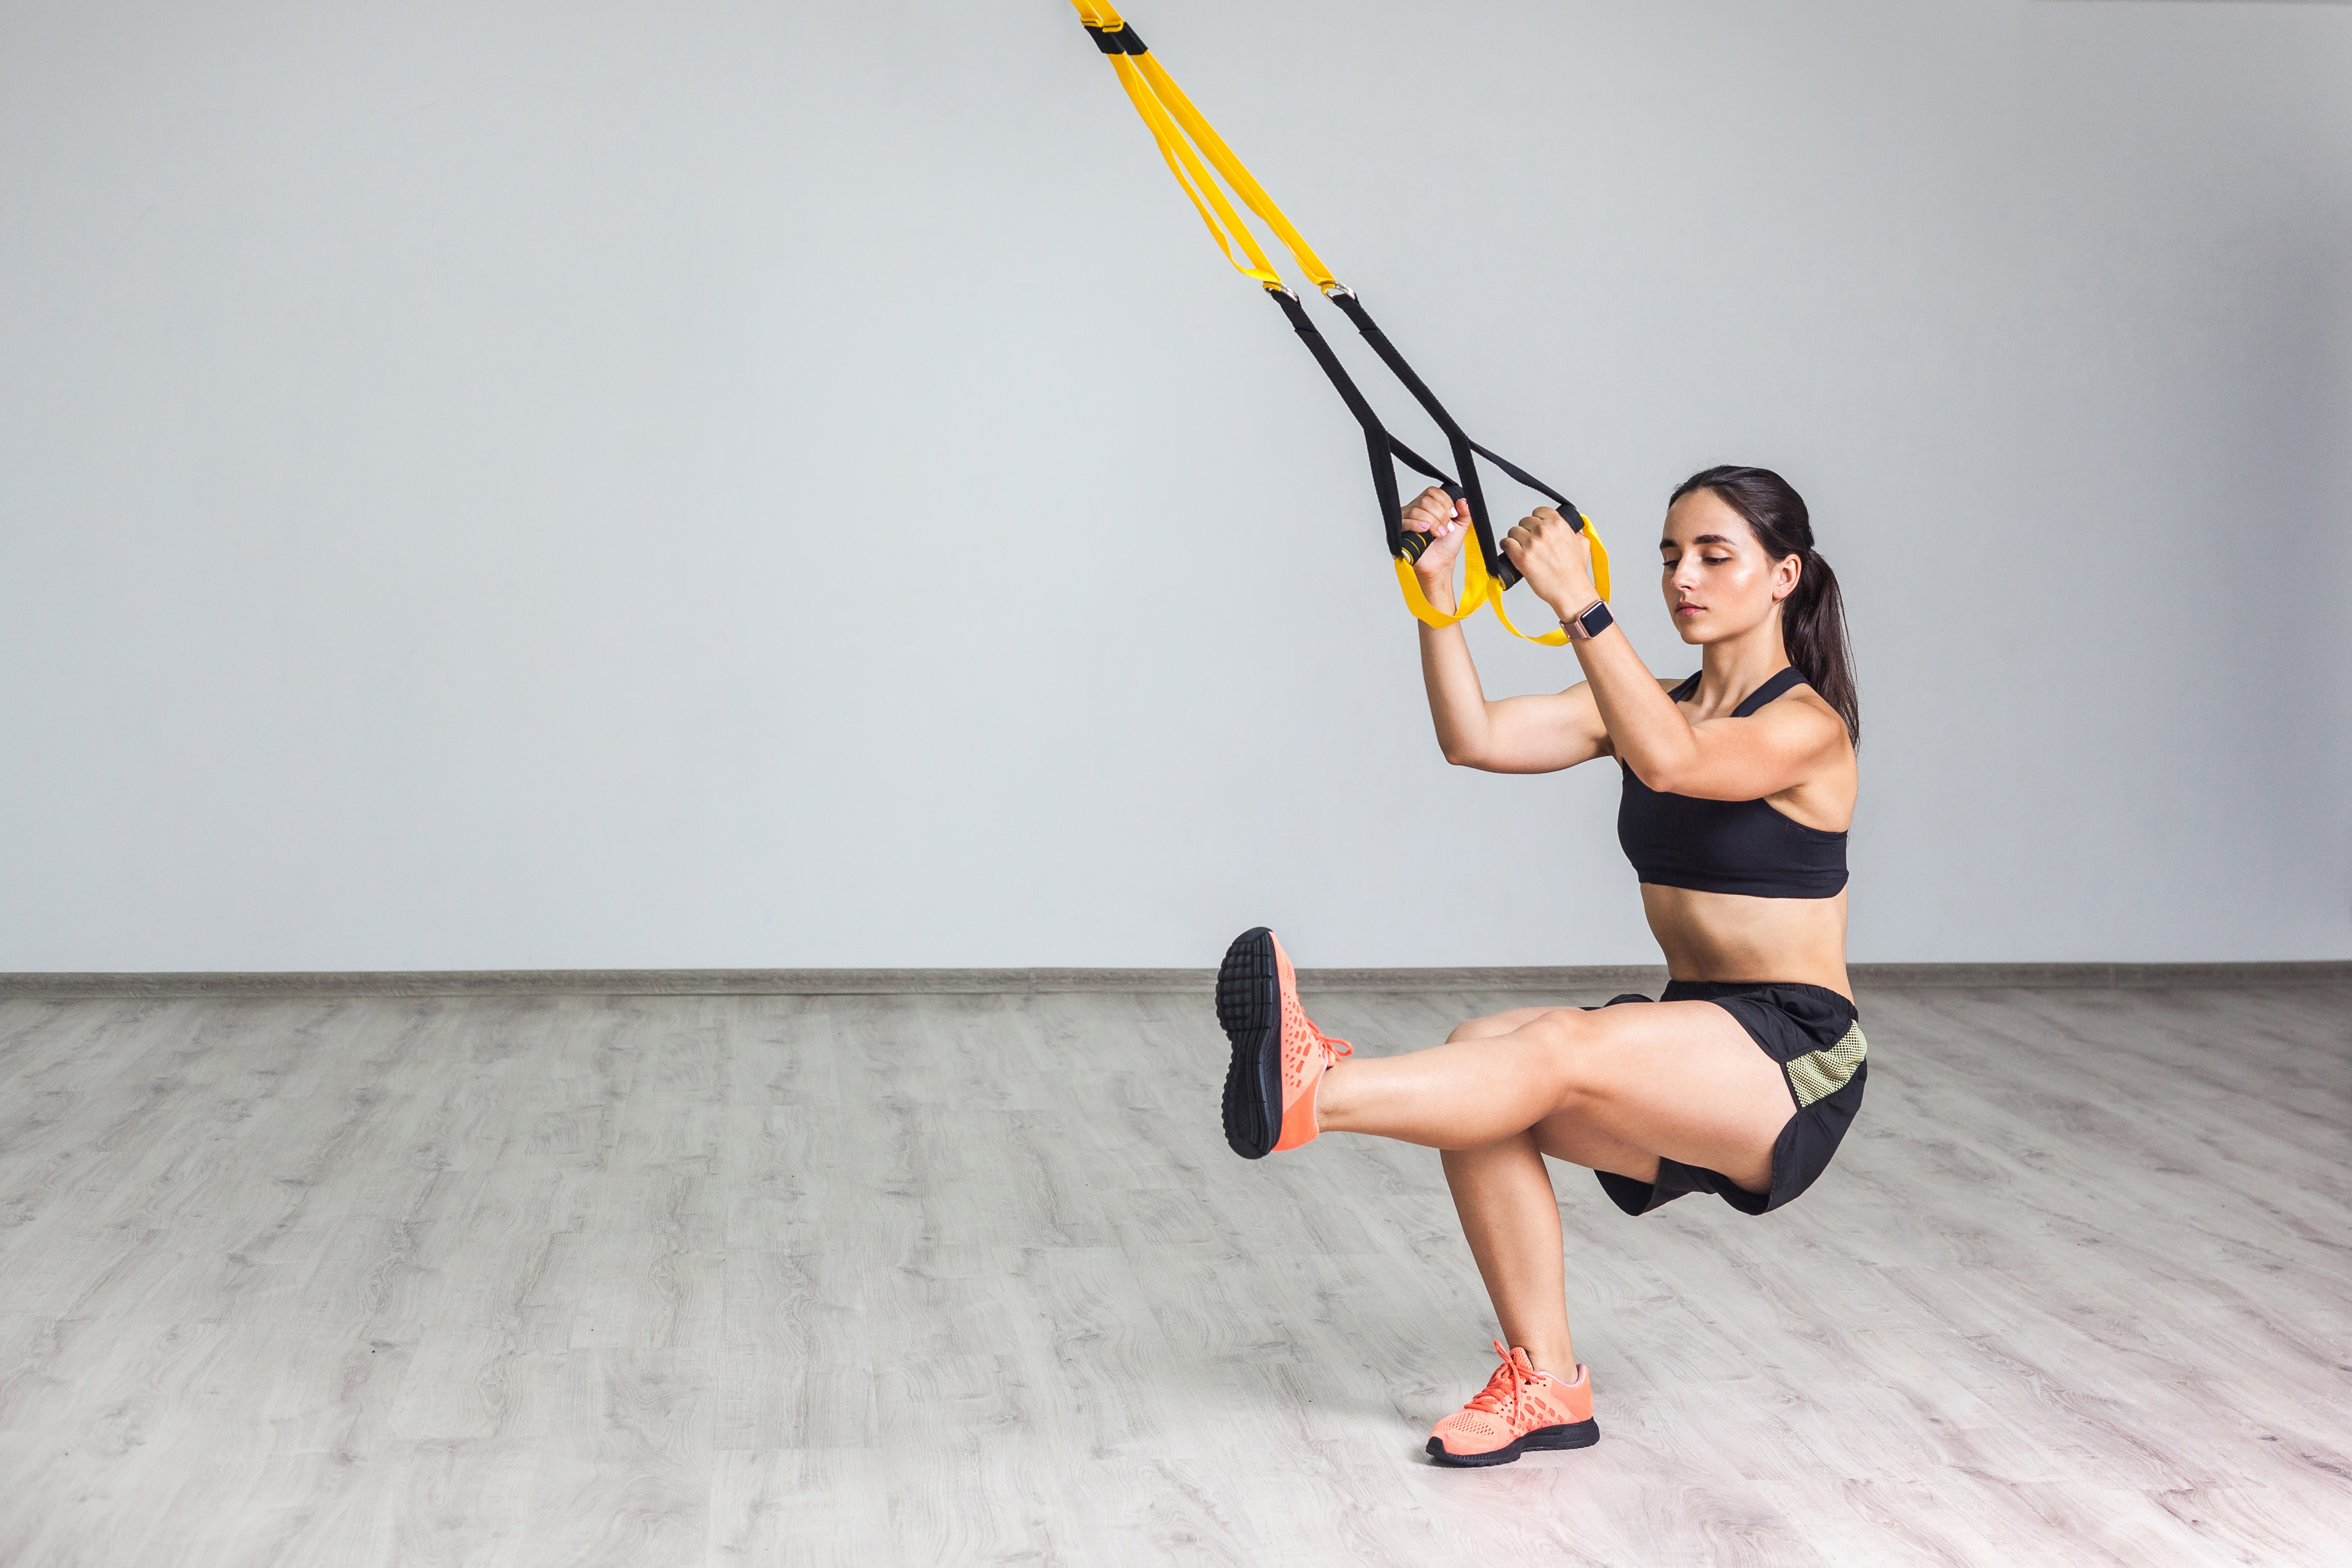 How to Do Single Leg 'Pistol' Squats, According to a Trainer